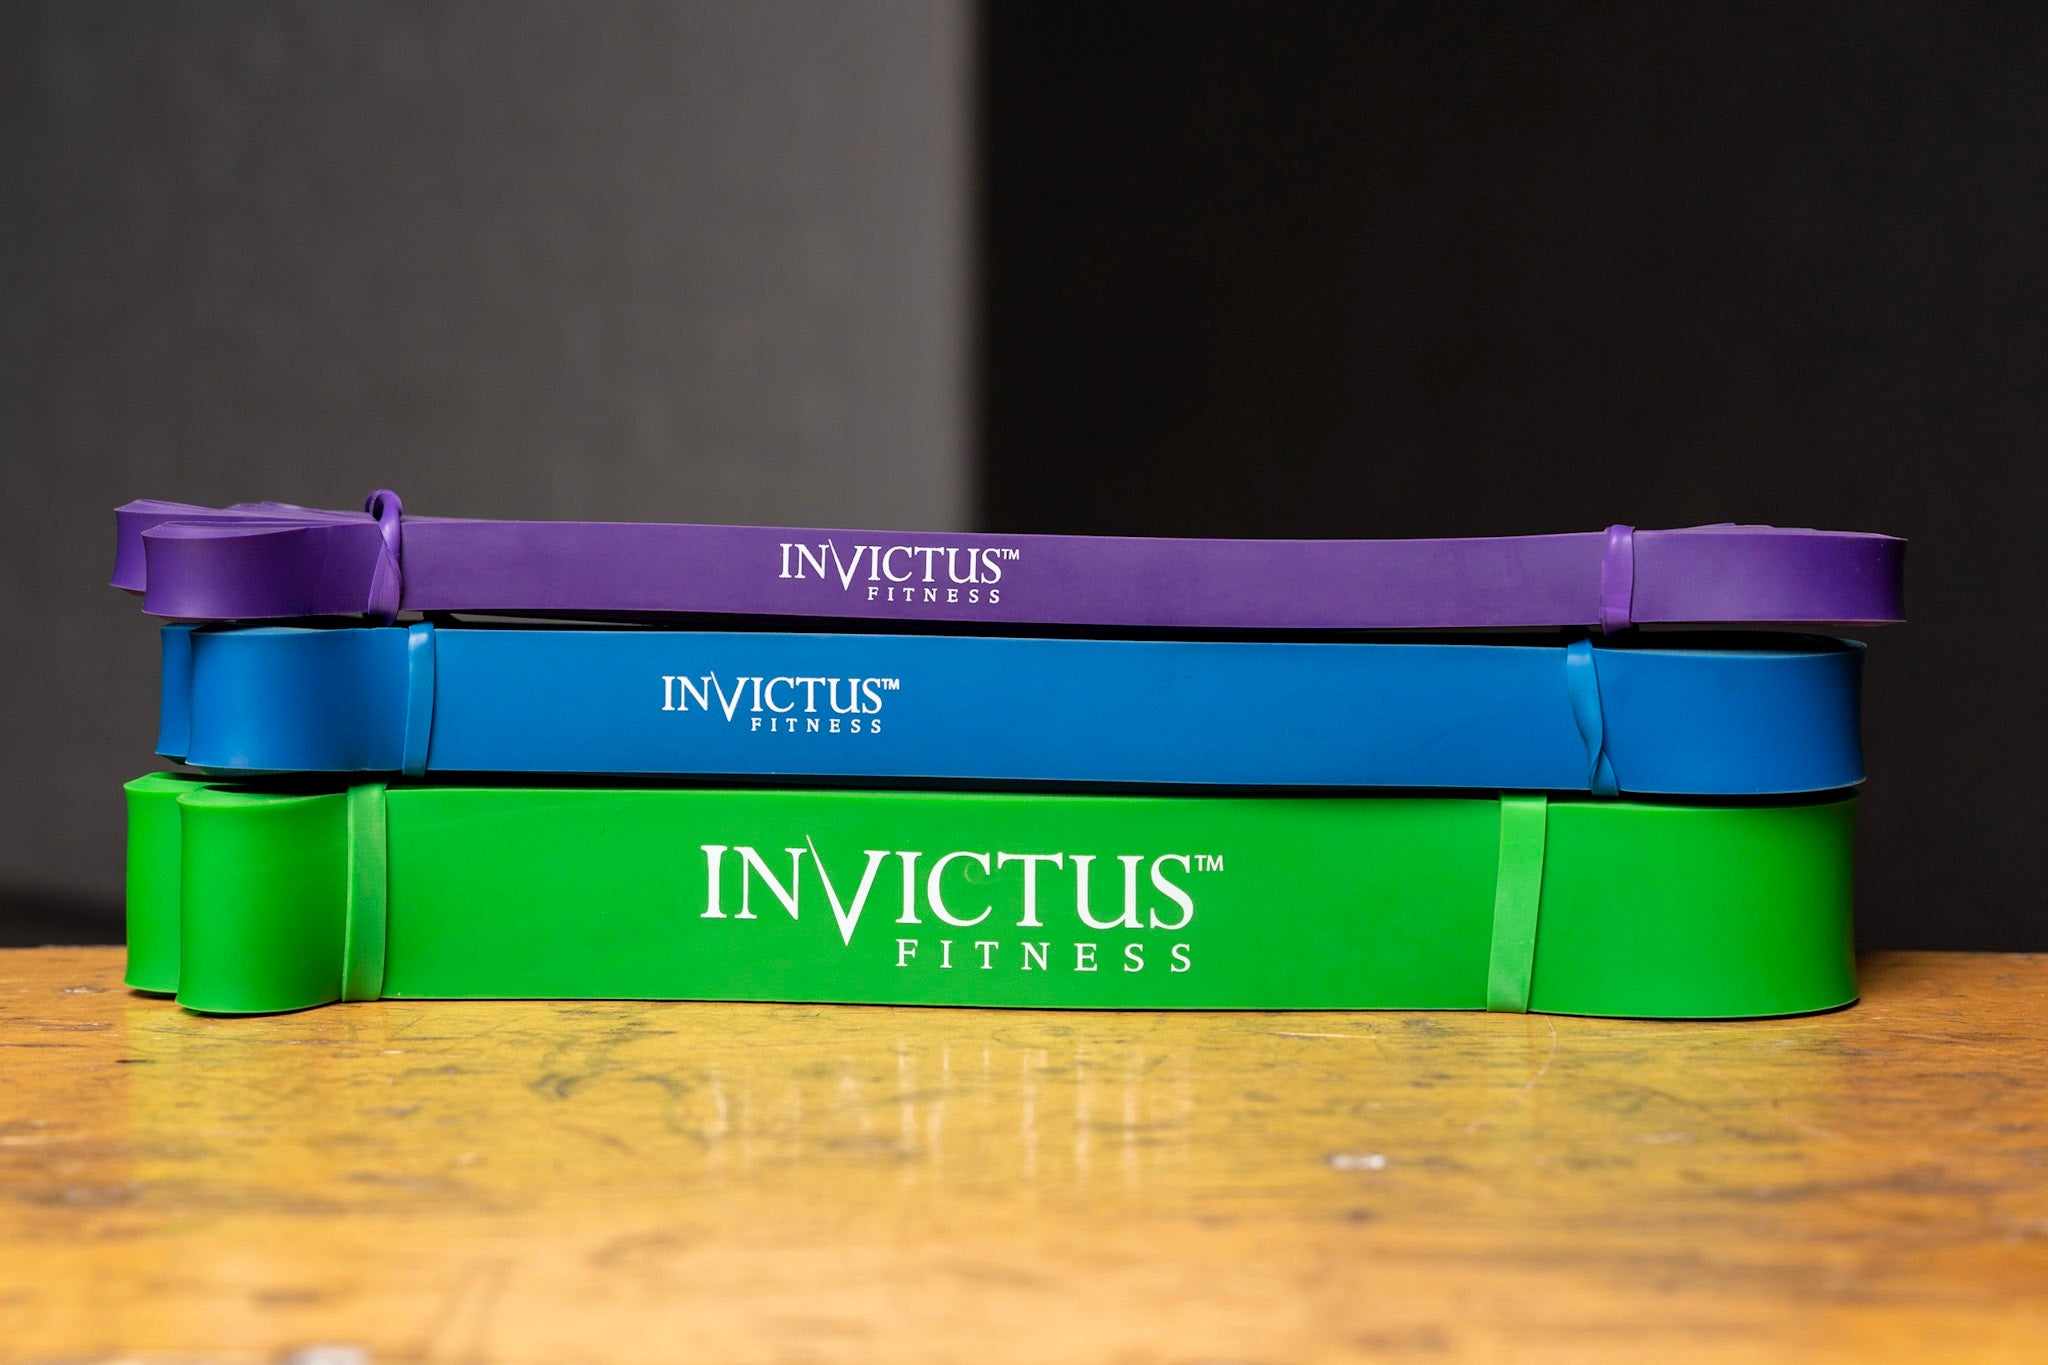 Invictus Resistance Bands - Set of 3